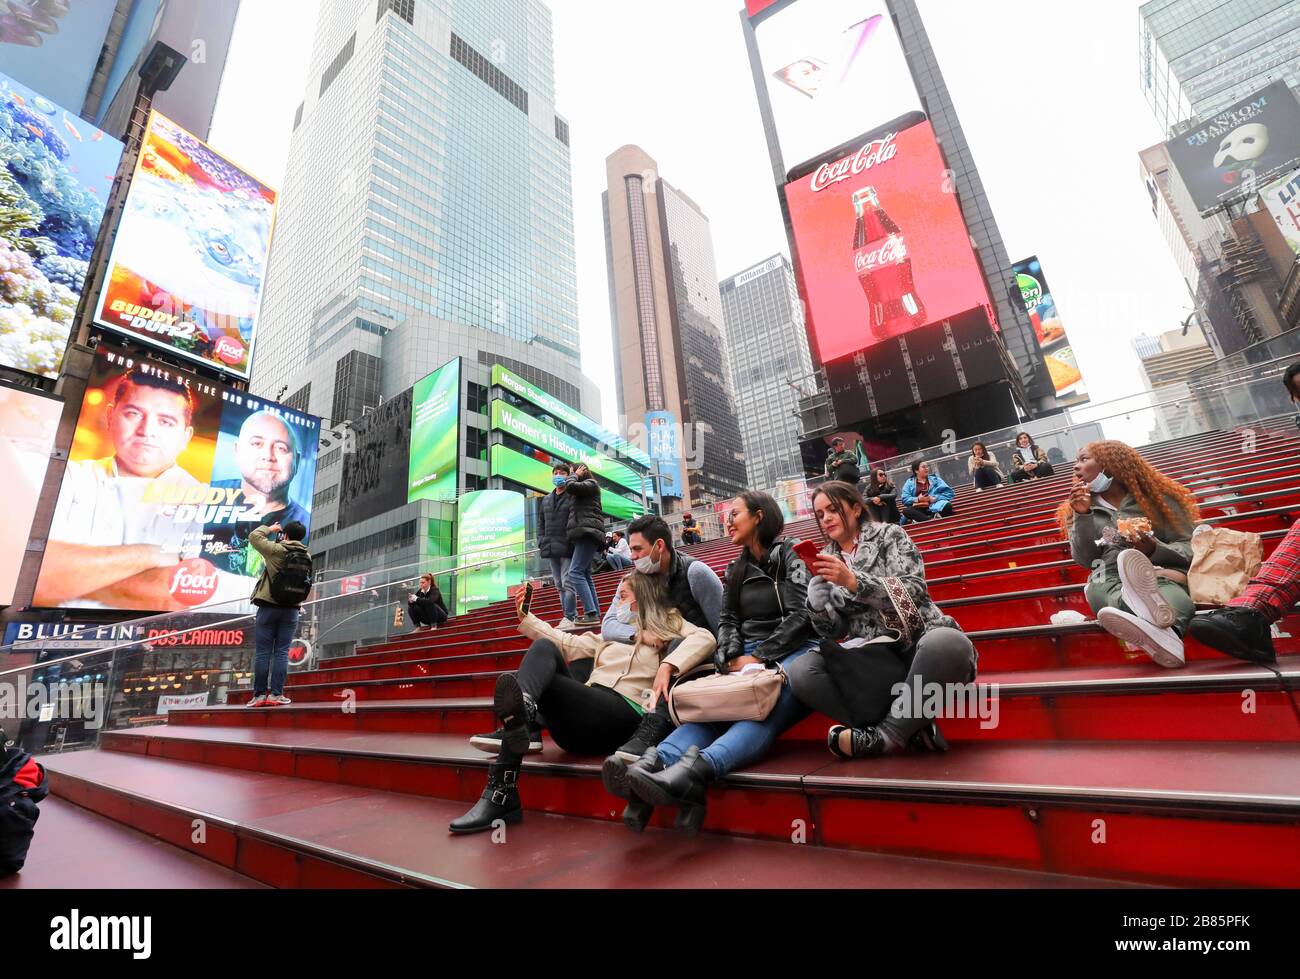 New York, USA. 19th Mar, 2020. Tourists wearing facial masks sit on the red stairs on Times Square in New York City, the United States, March 19, 2020. The number of COVID-19 cases in the United States topped 13,000 as of 5:30 p.m. (2130 GMT) on Thursday, according to the Center for Systems Science and Engineering (CSSE) at Johns Hopkins University. The fresh figure reached 13,060 with 175 deaths. Credit: Wang Ying/Xinhua/Alamy Live News Stock Photo